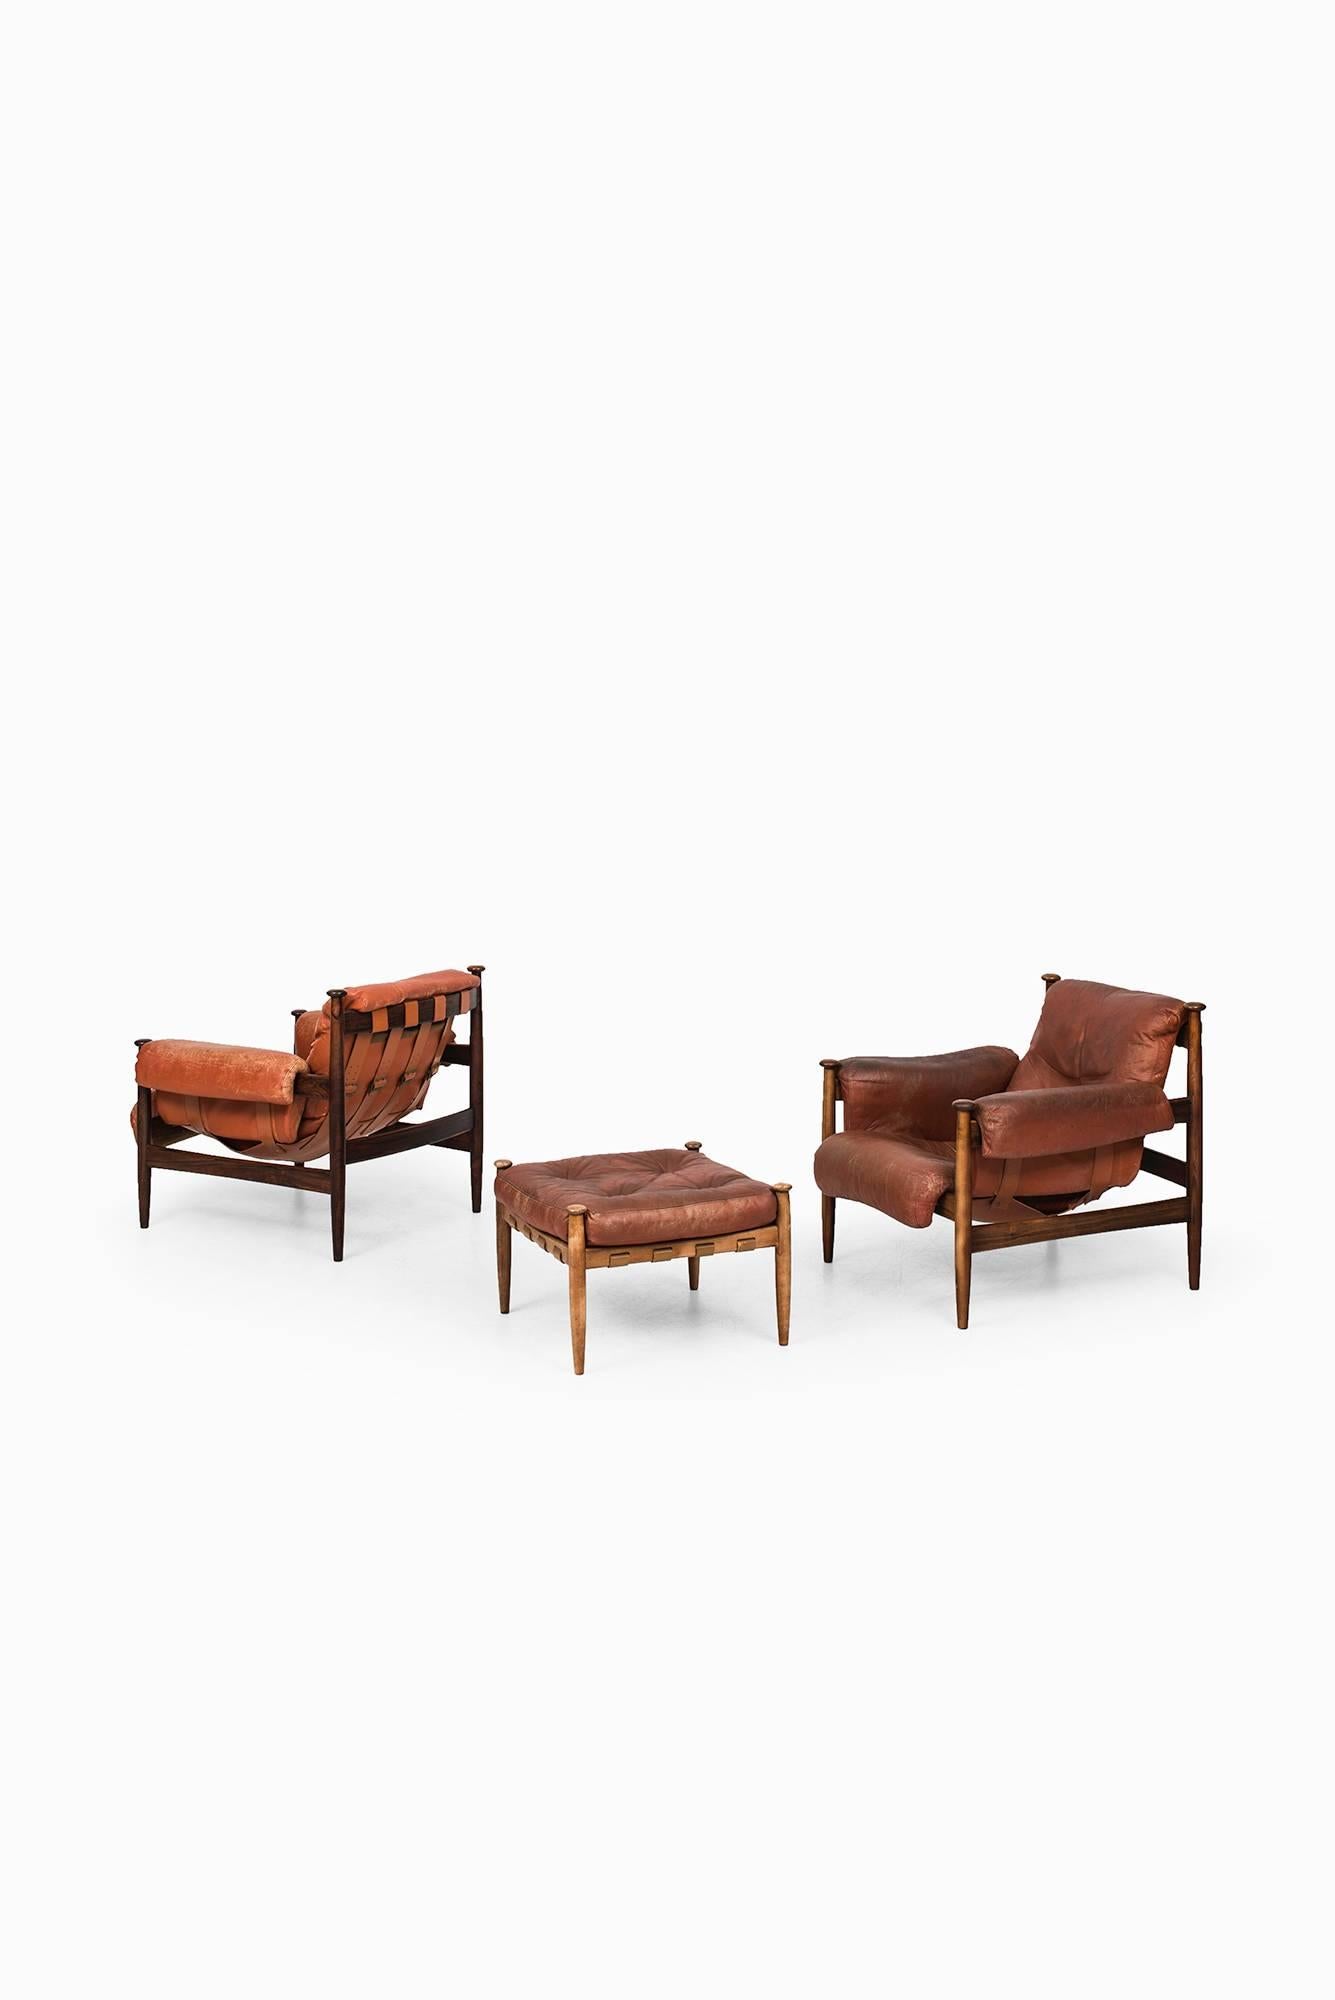 Mid-20th Century Eric Merthen Easy Chairs Model Amiral Produced by Ire Möbler in Sweden